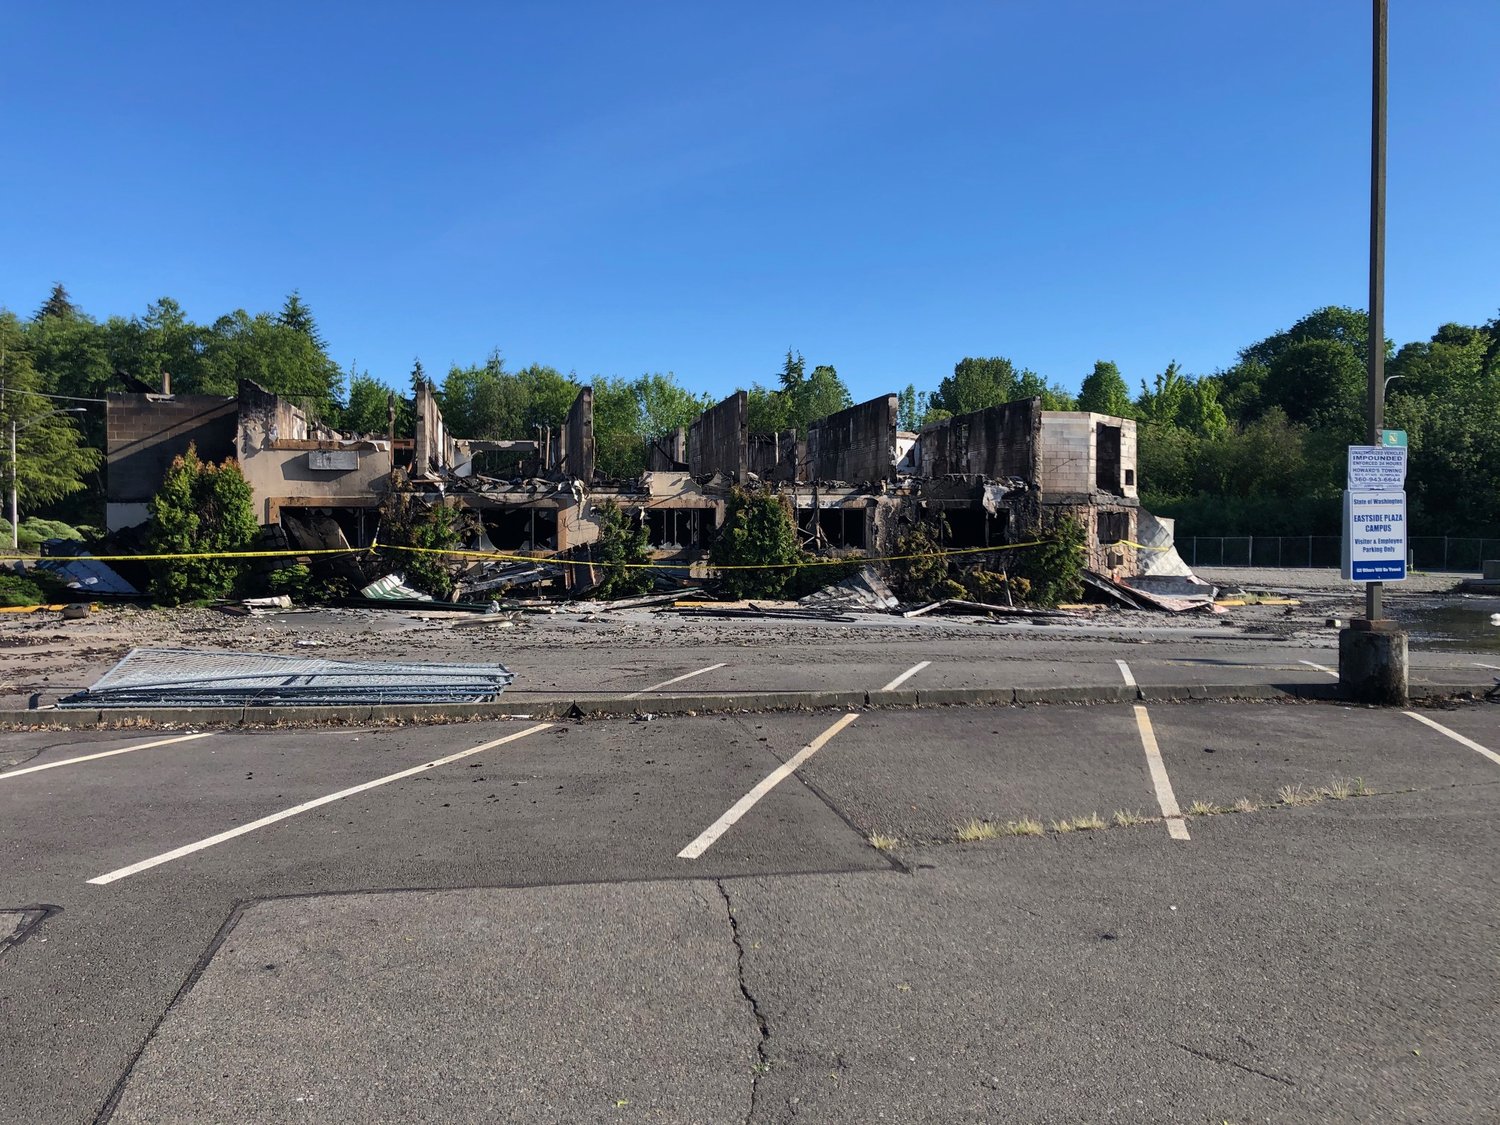 After a fire on May 29, 2021, this is what remains of the north building that was, until May 22, 2020, the Quality Inn at 1211 Quince St. SE in Olympia. Photo taken Sun., May 30, 2021